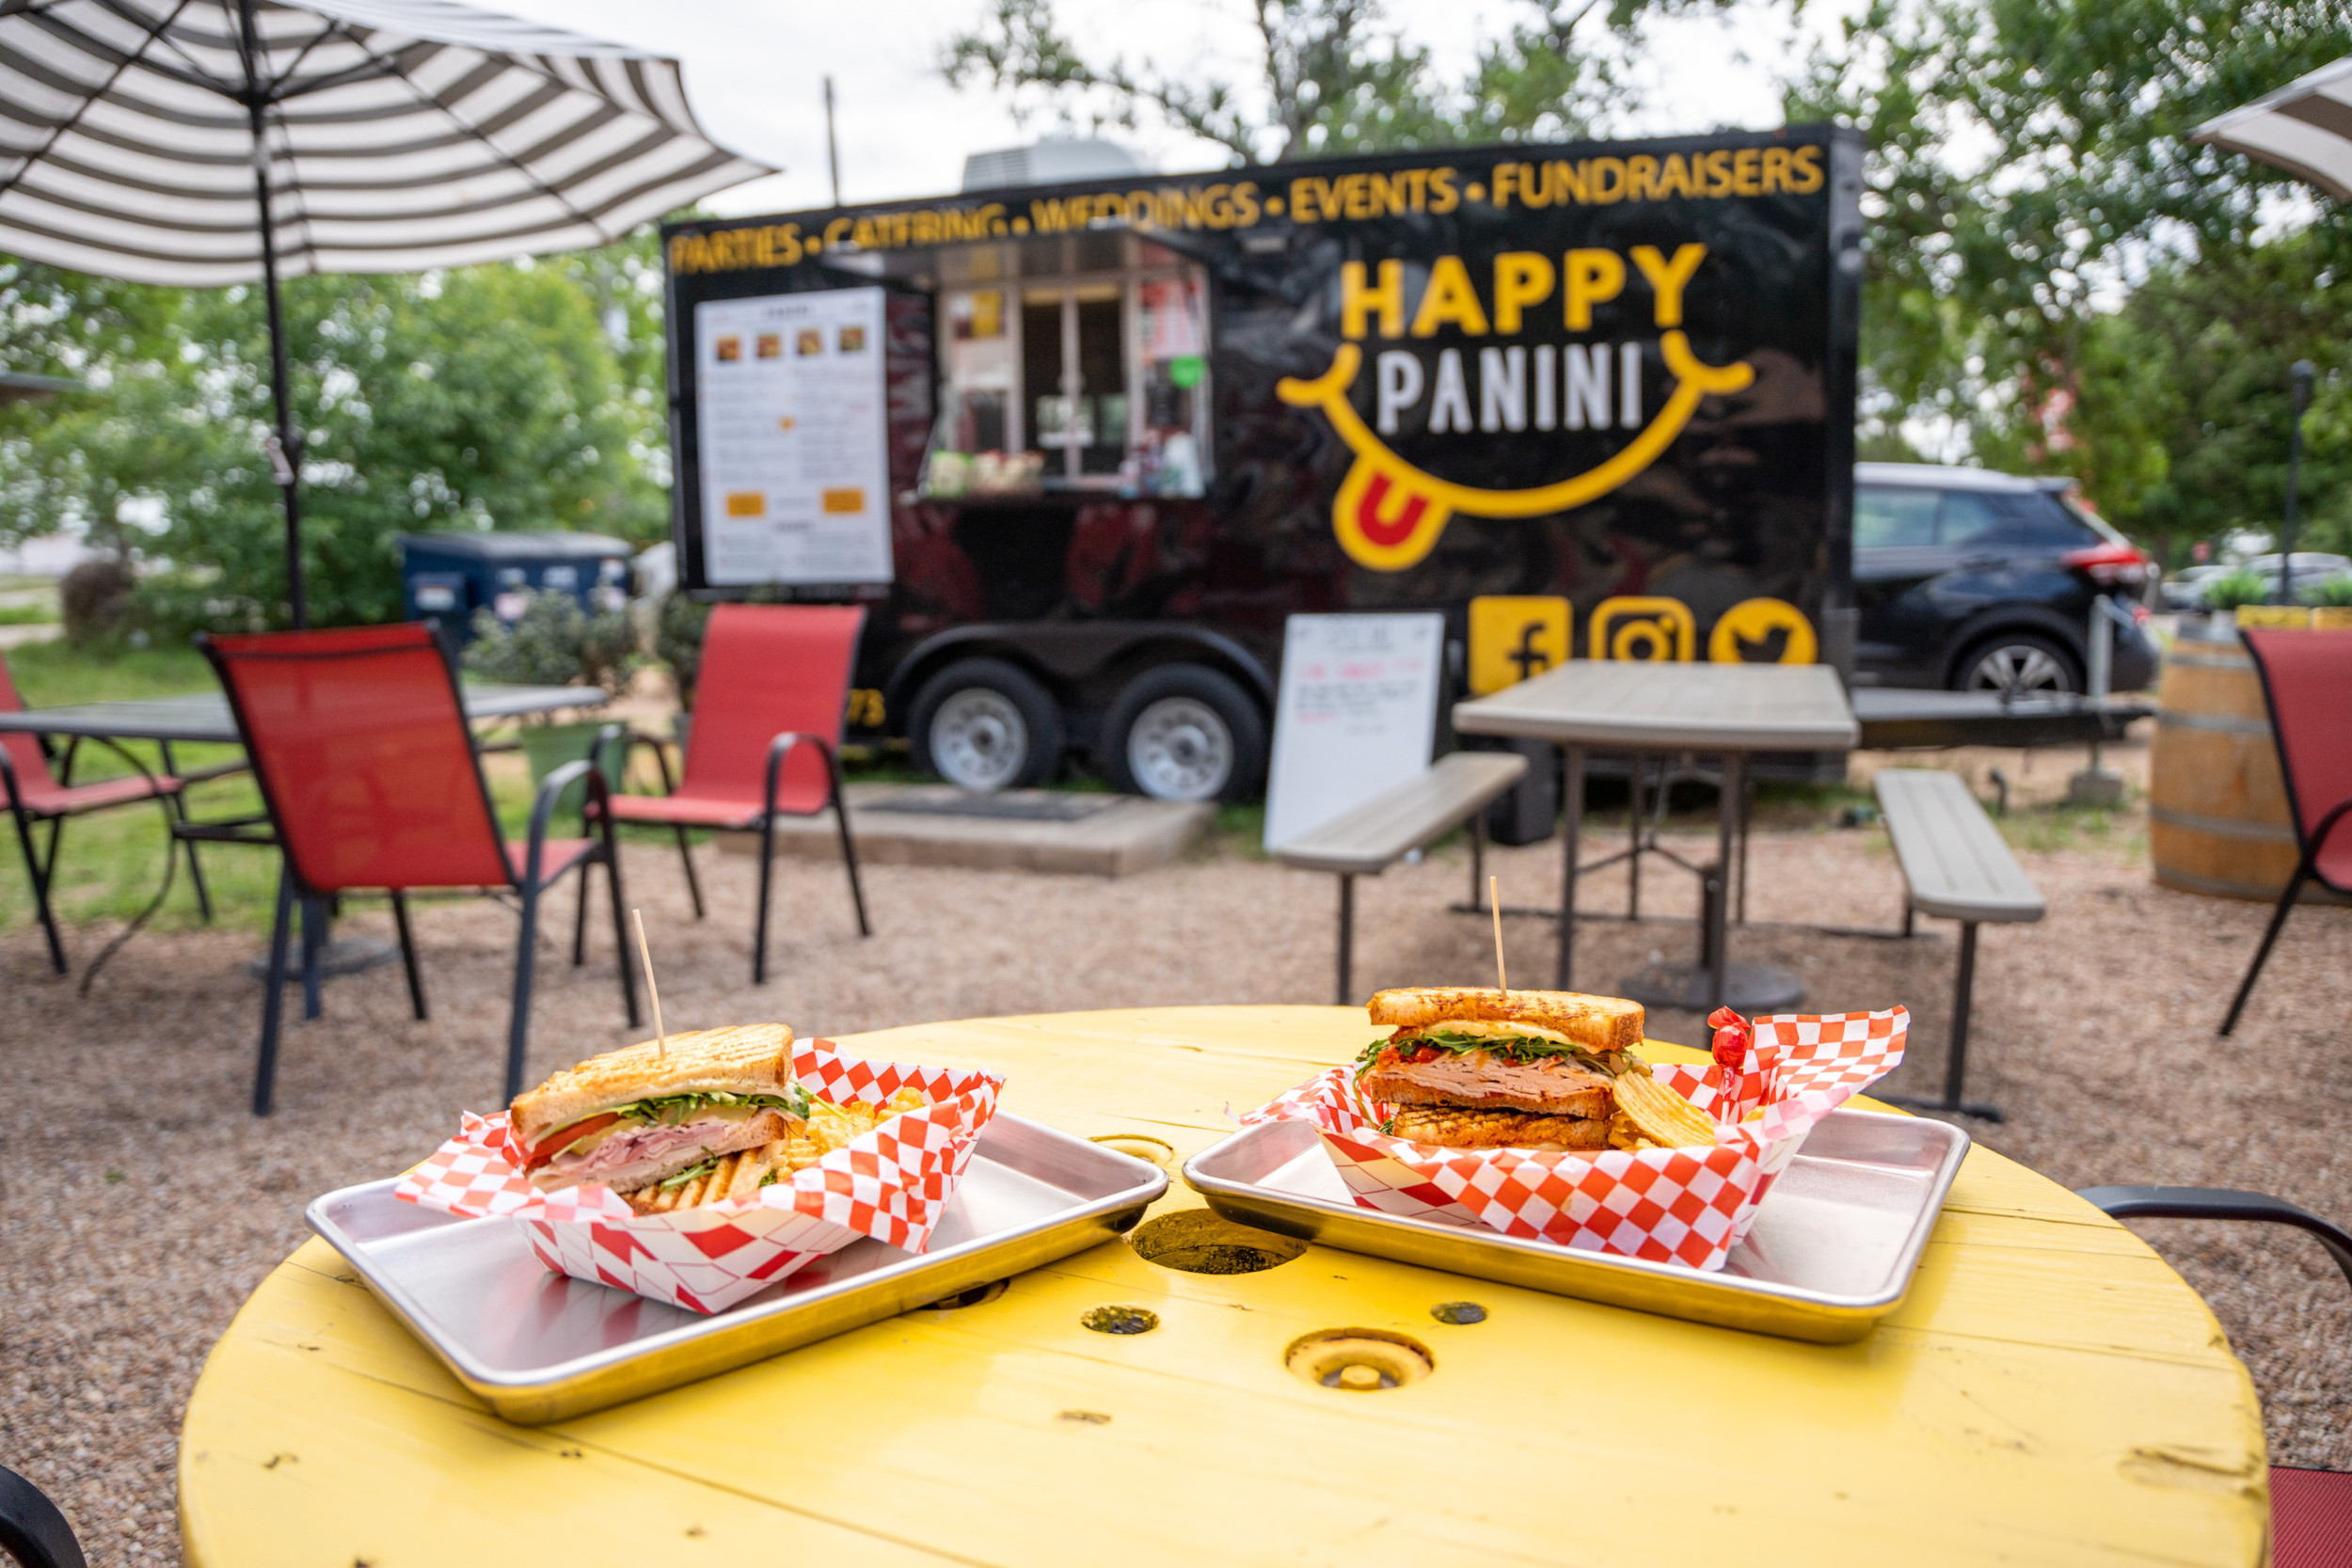 Sandwiches at happy panini food truck dining area